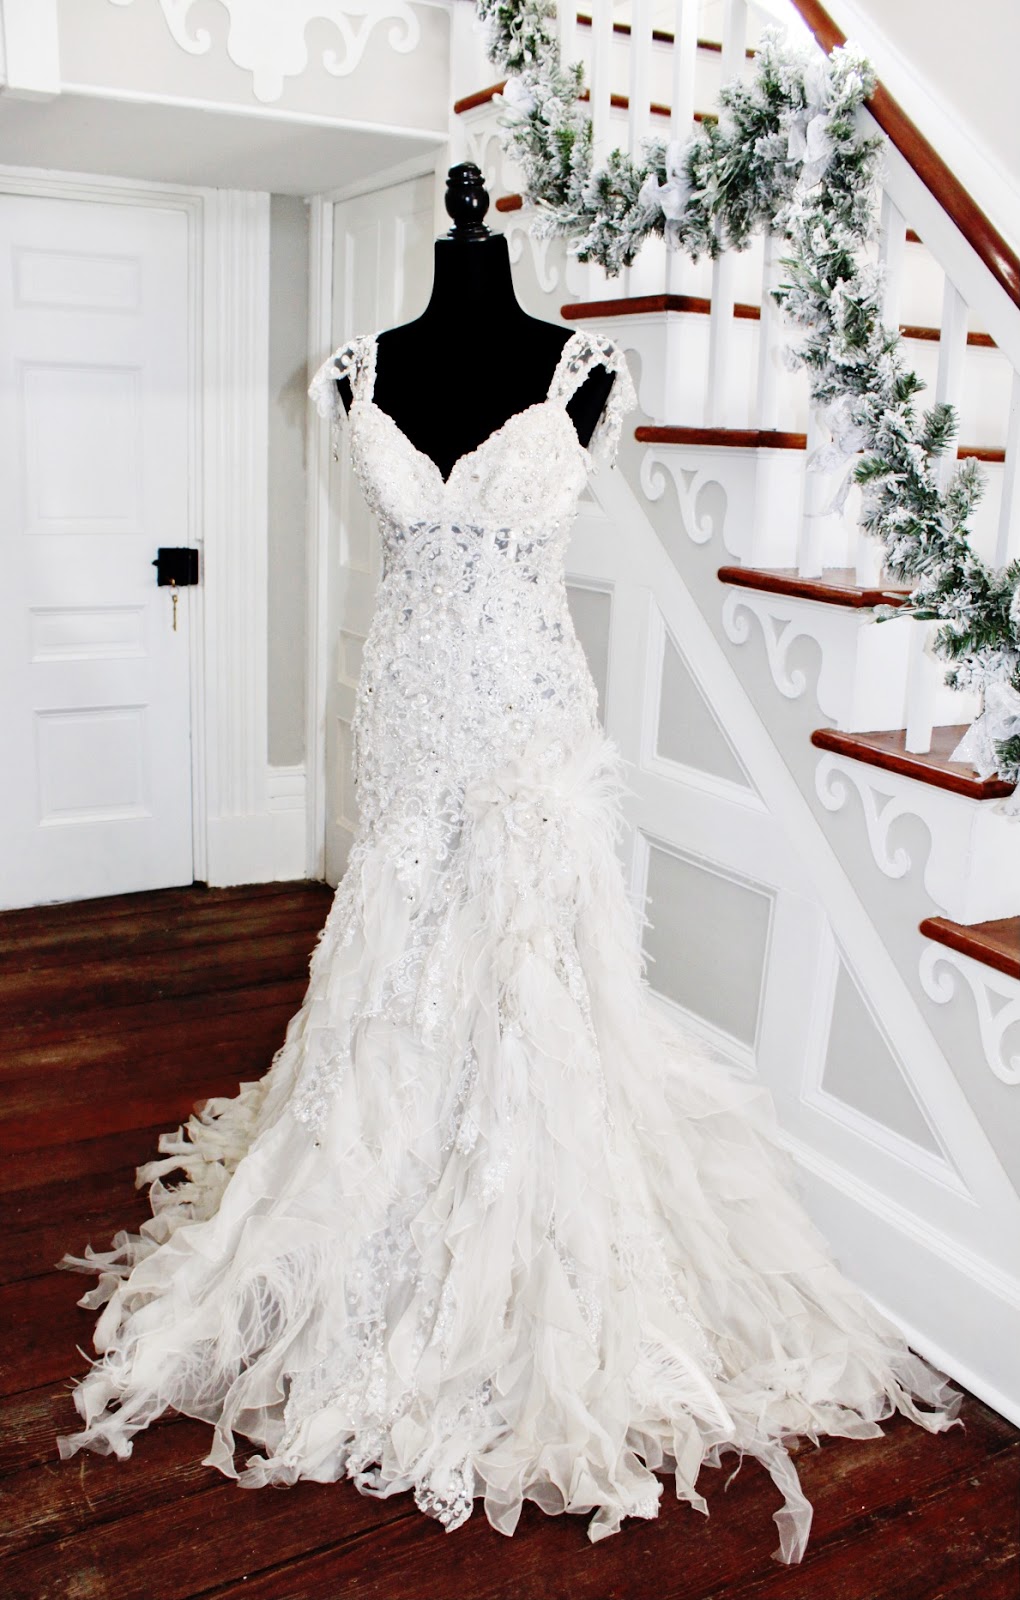 The Lily Mae Bridal Boutique | 107 W Academy St, Madison, NC 27025 | Phone: (336) 565-7050